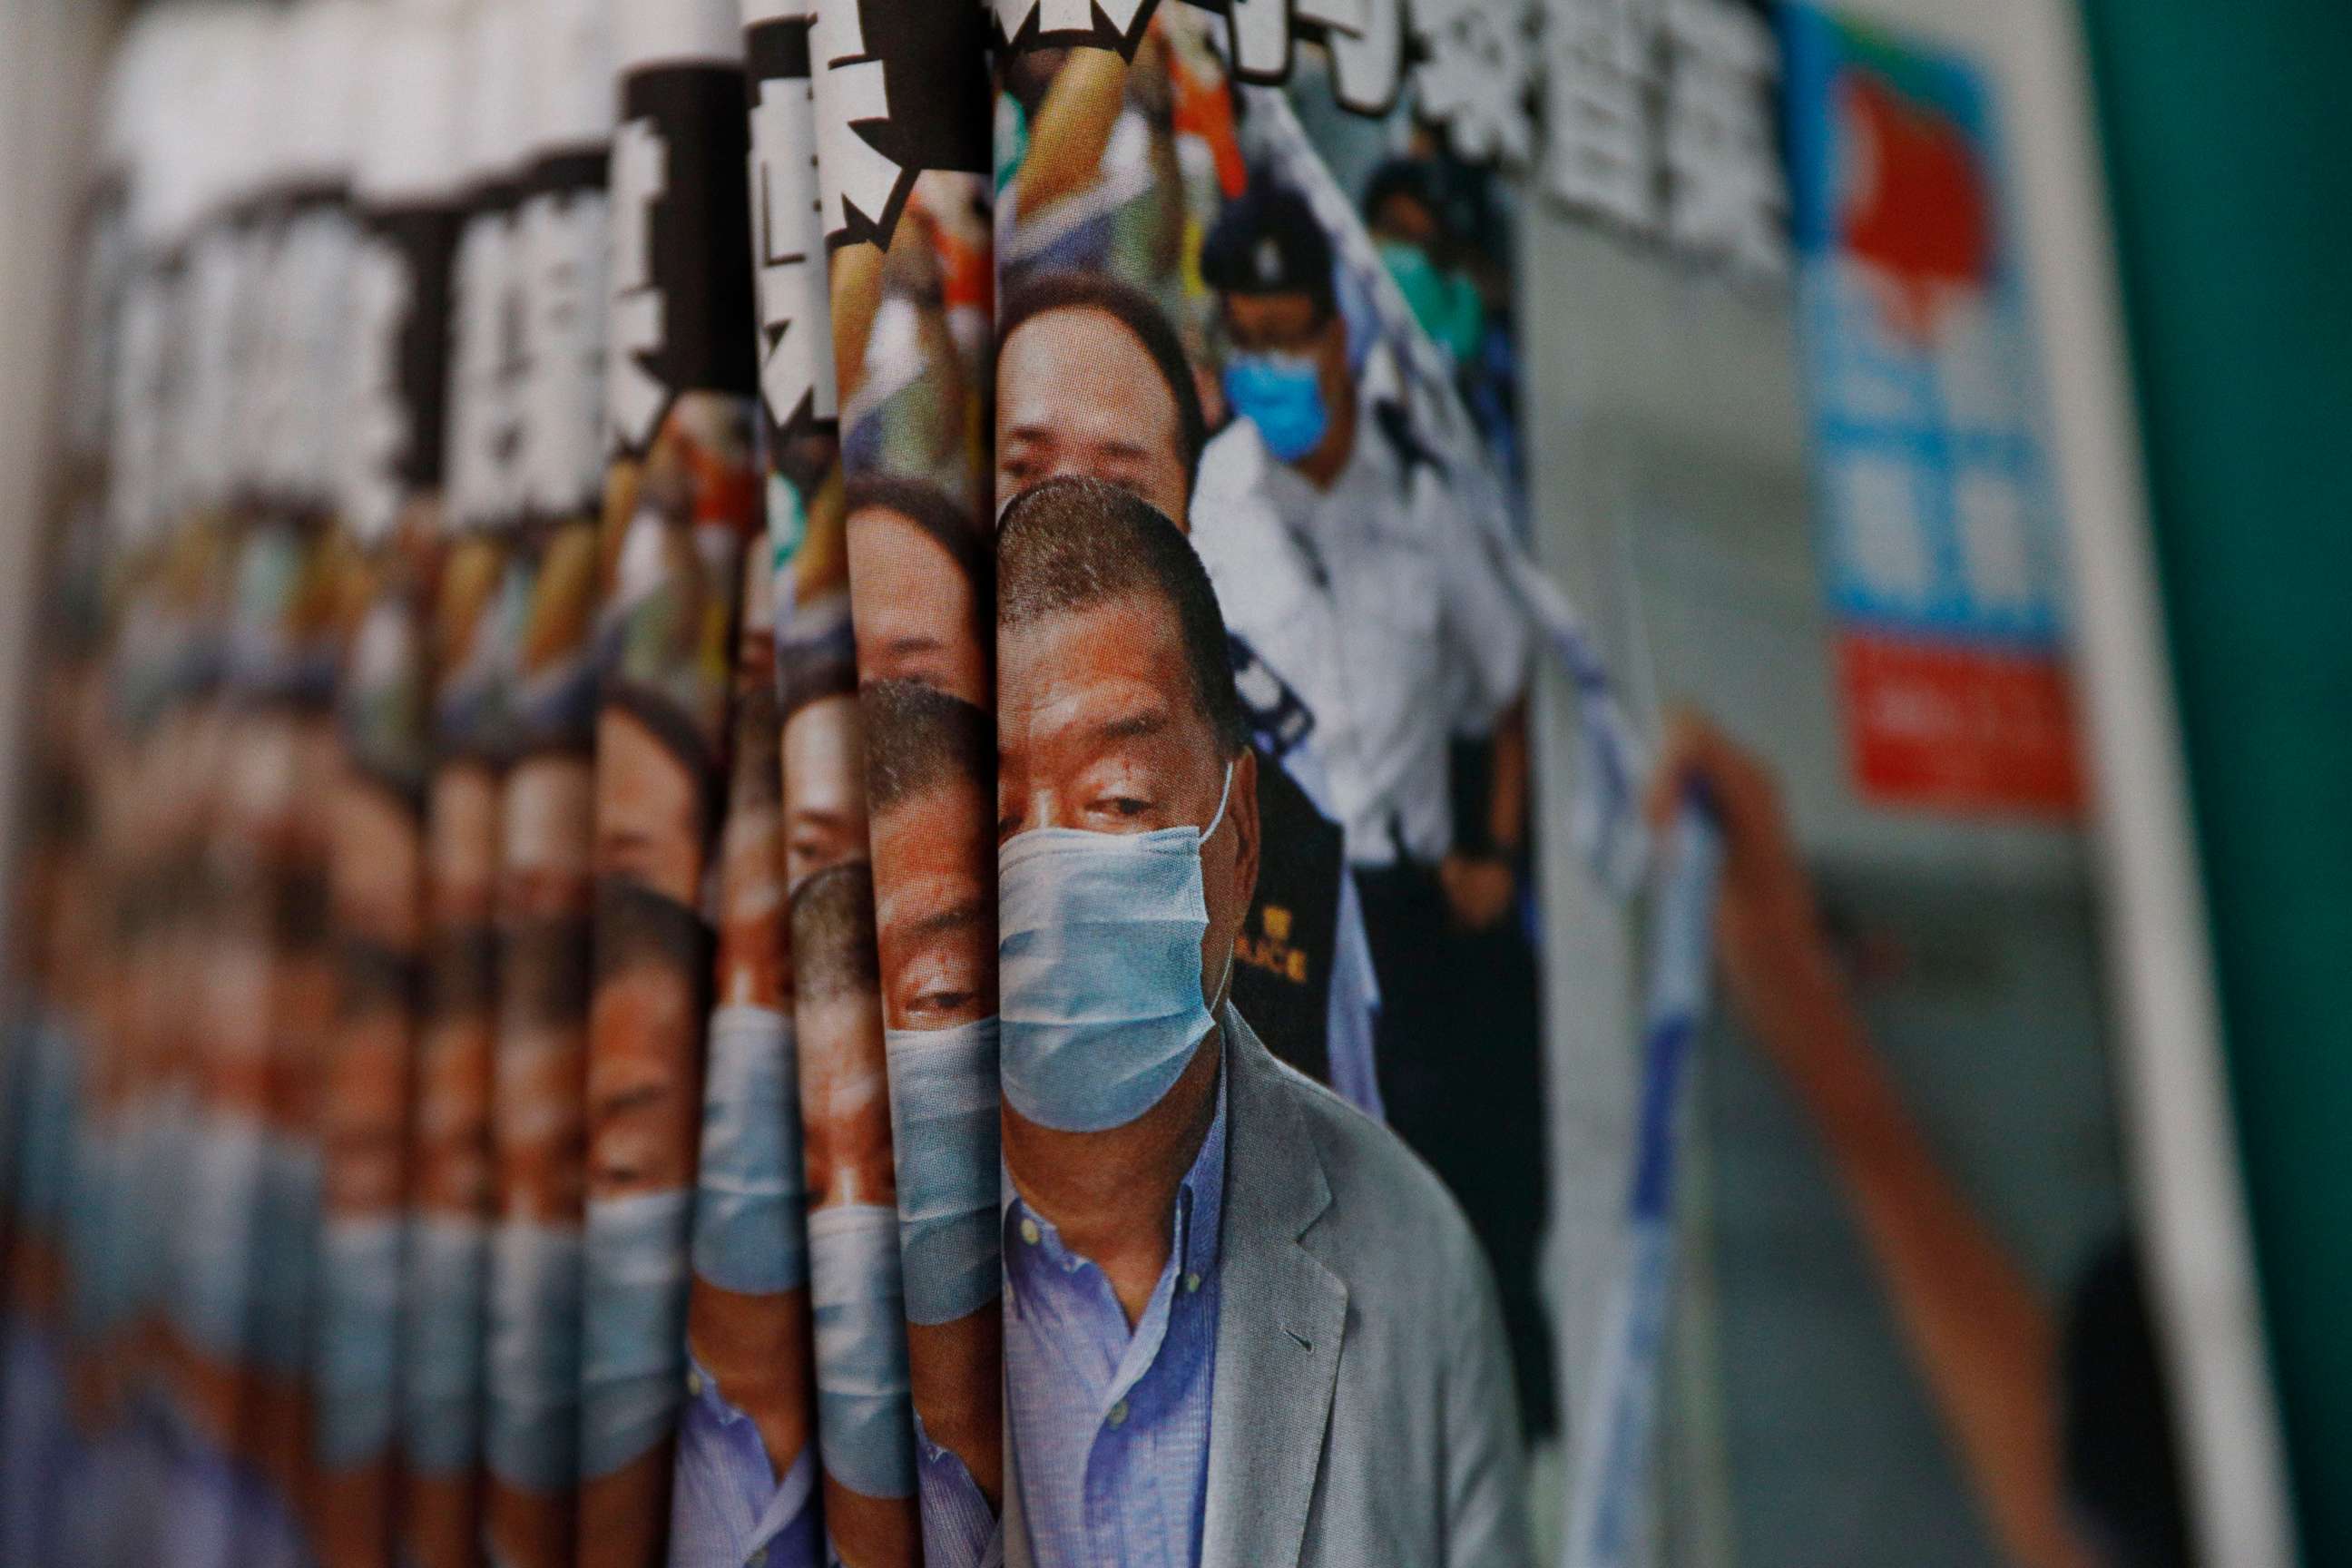 PHOTO: Copies of Apple Daily newspaper with front pages featuring Hong Kong media tycoon Jimmy Lai, are displayed for sale at a newsstand in Hong Kong Tuesday, Aug. 11, 2020. 